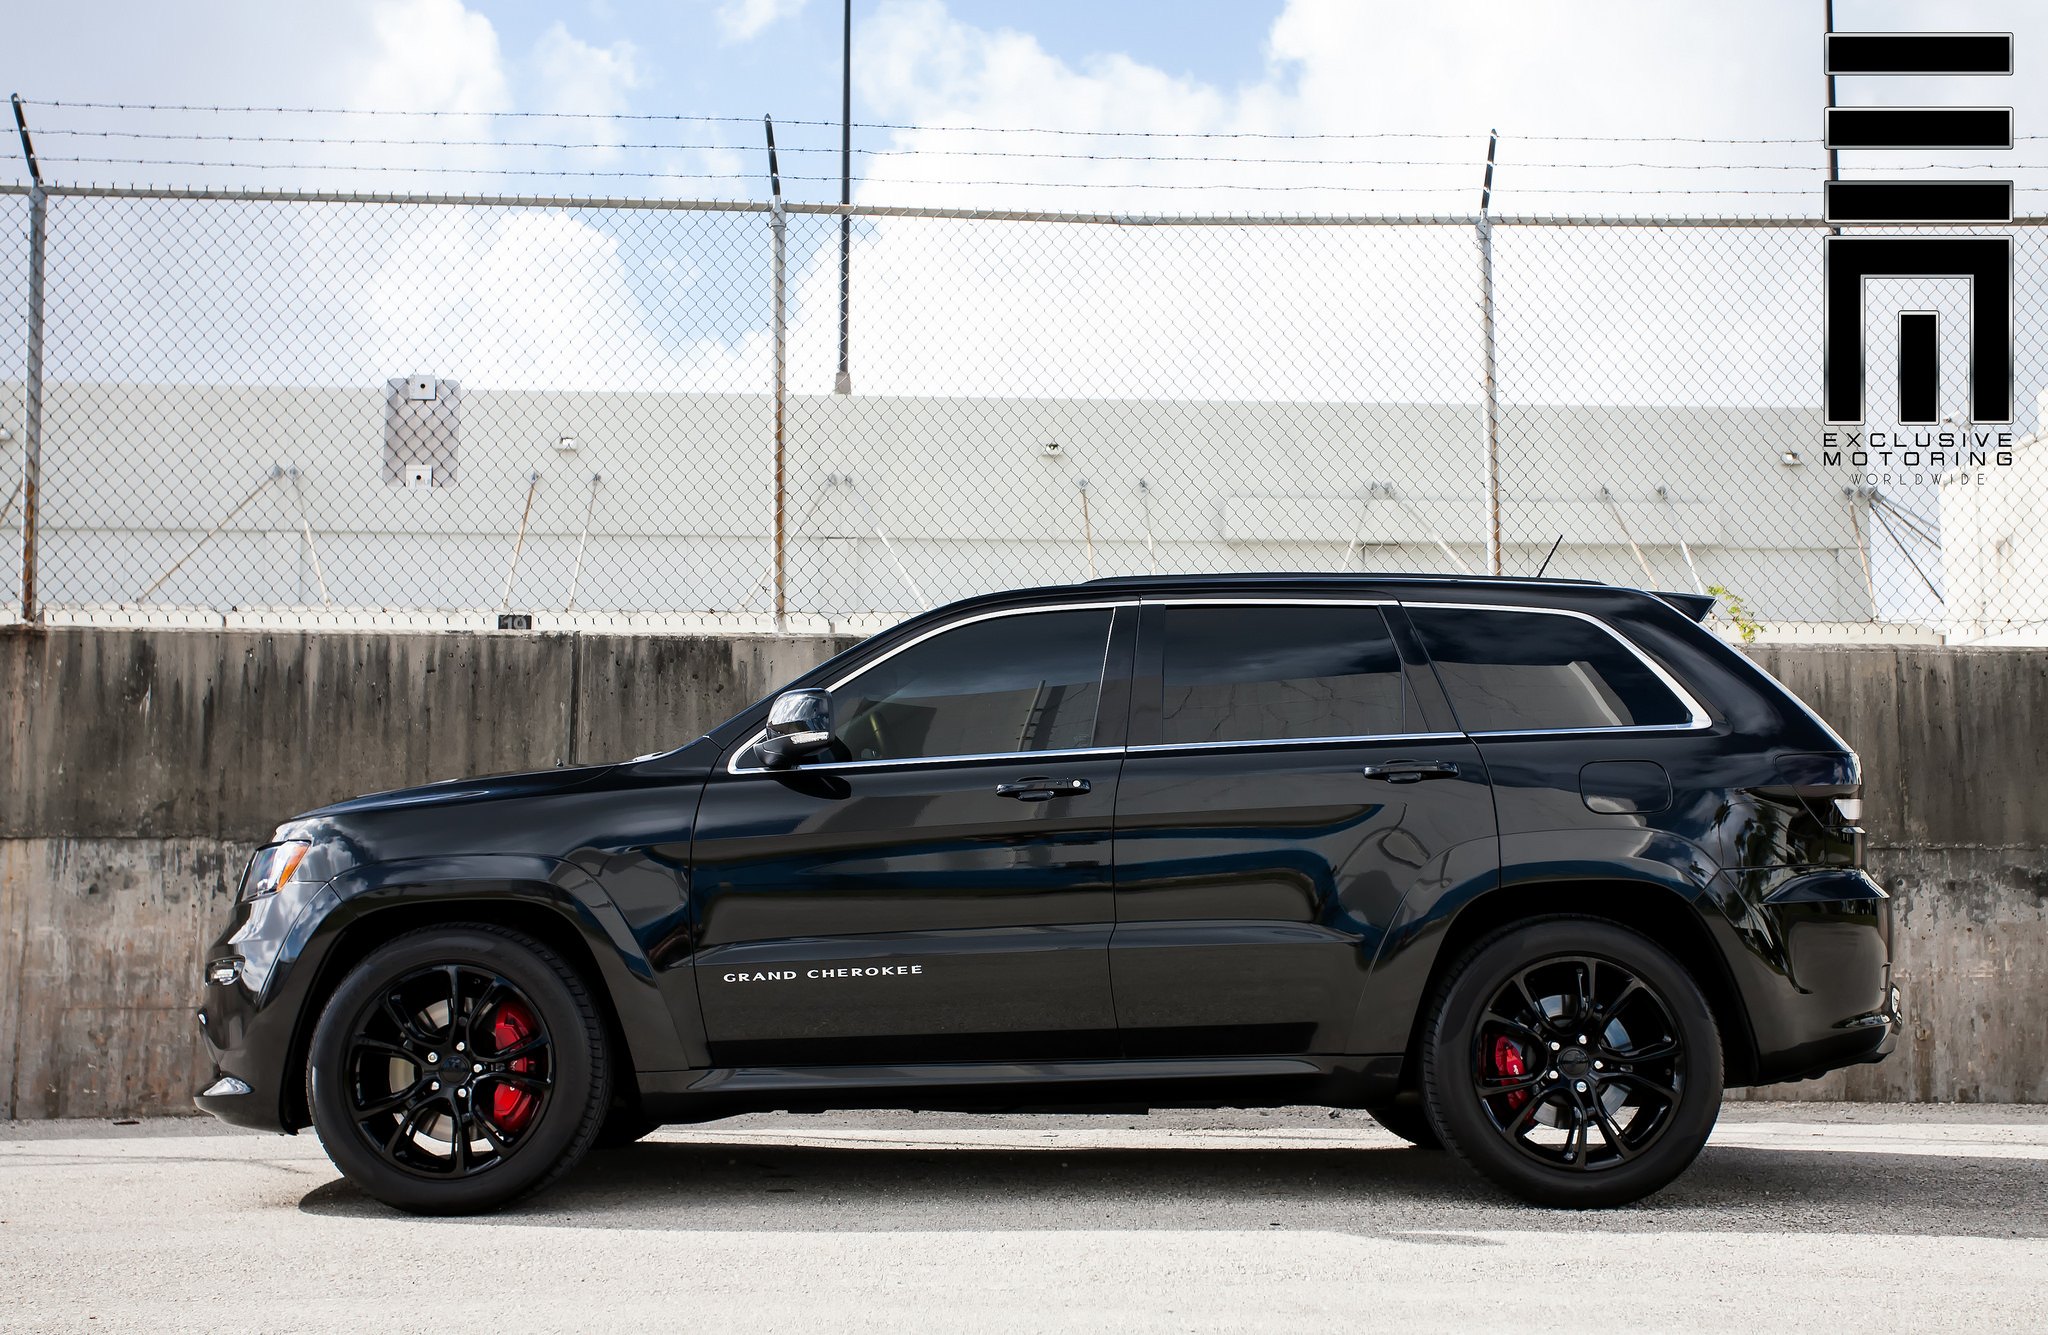 Black Jeep Grand Cherokee With Red Brakes - Photo by Exclusive Motoring